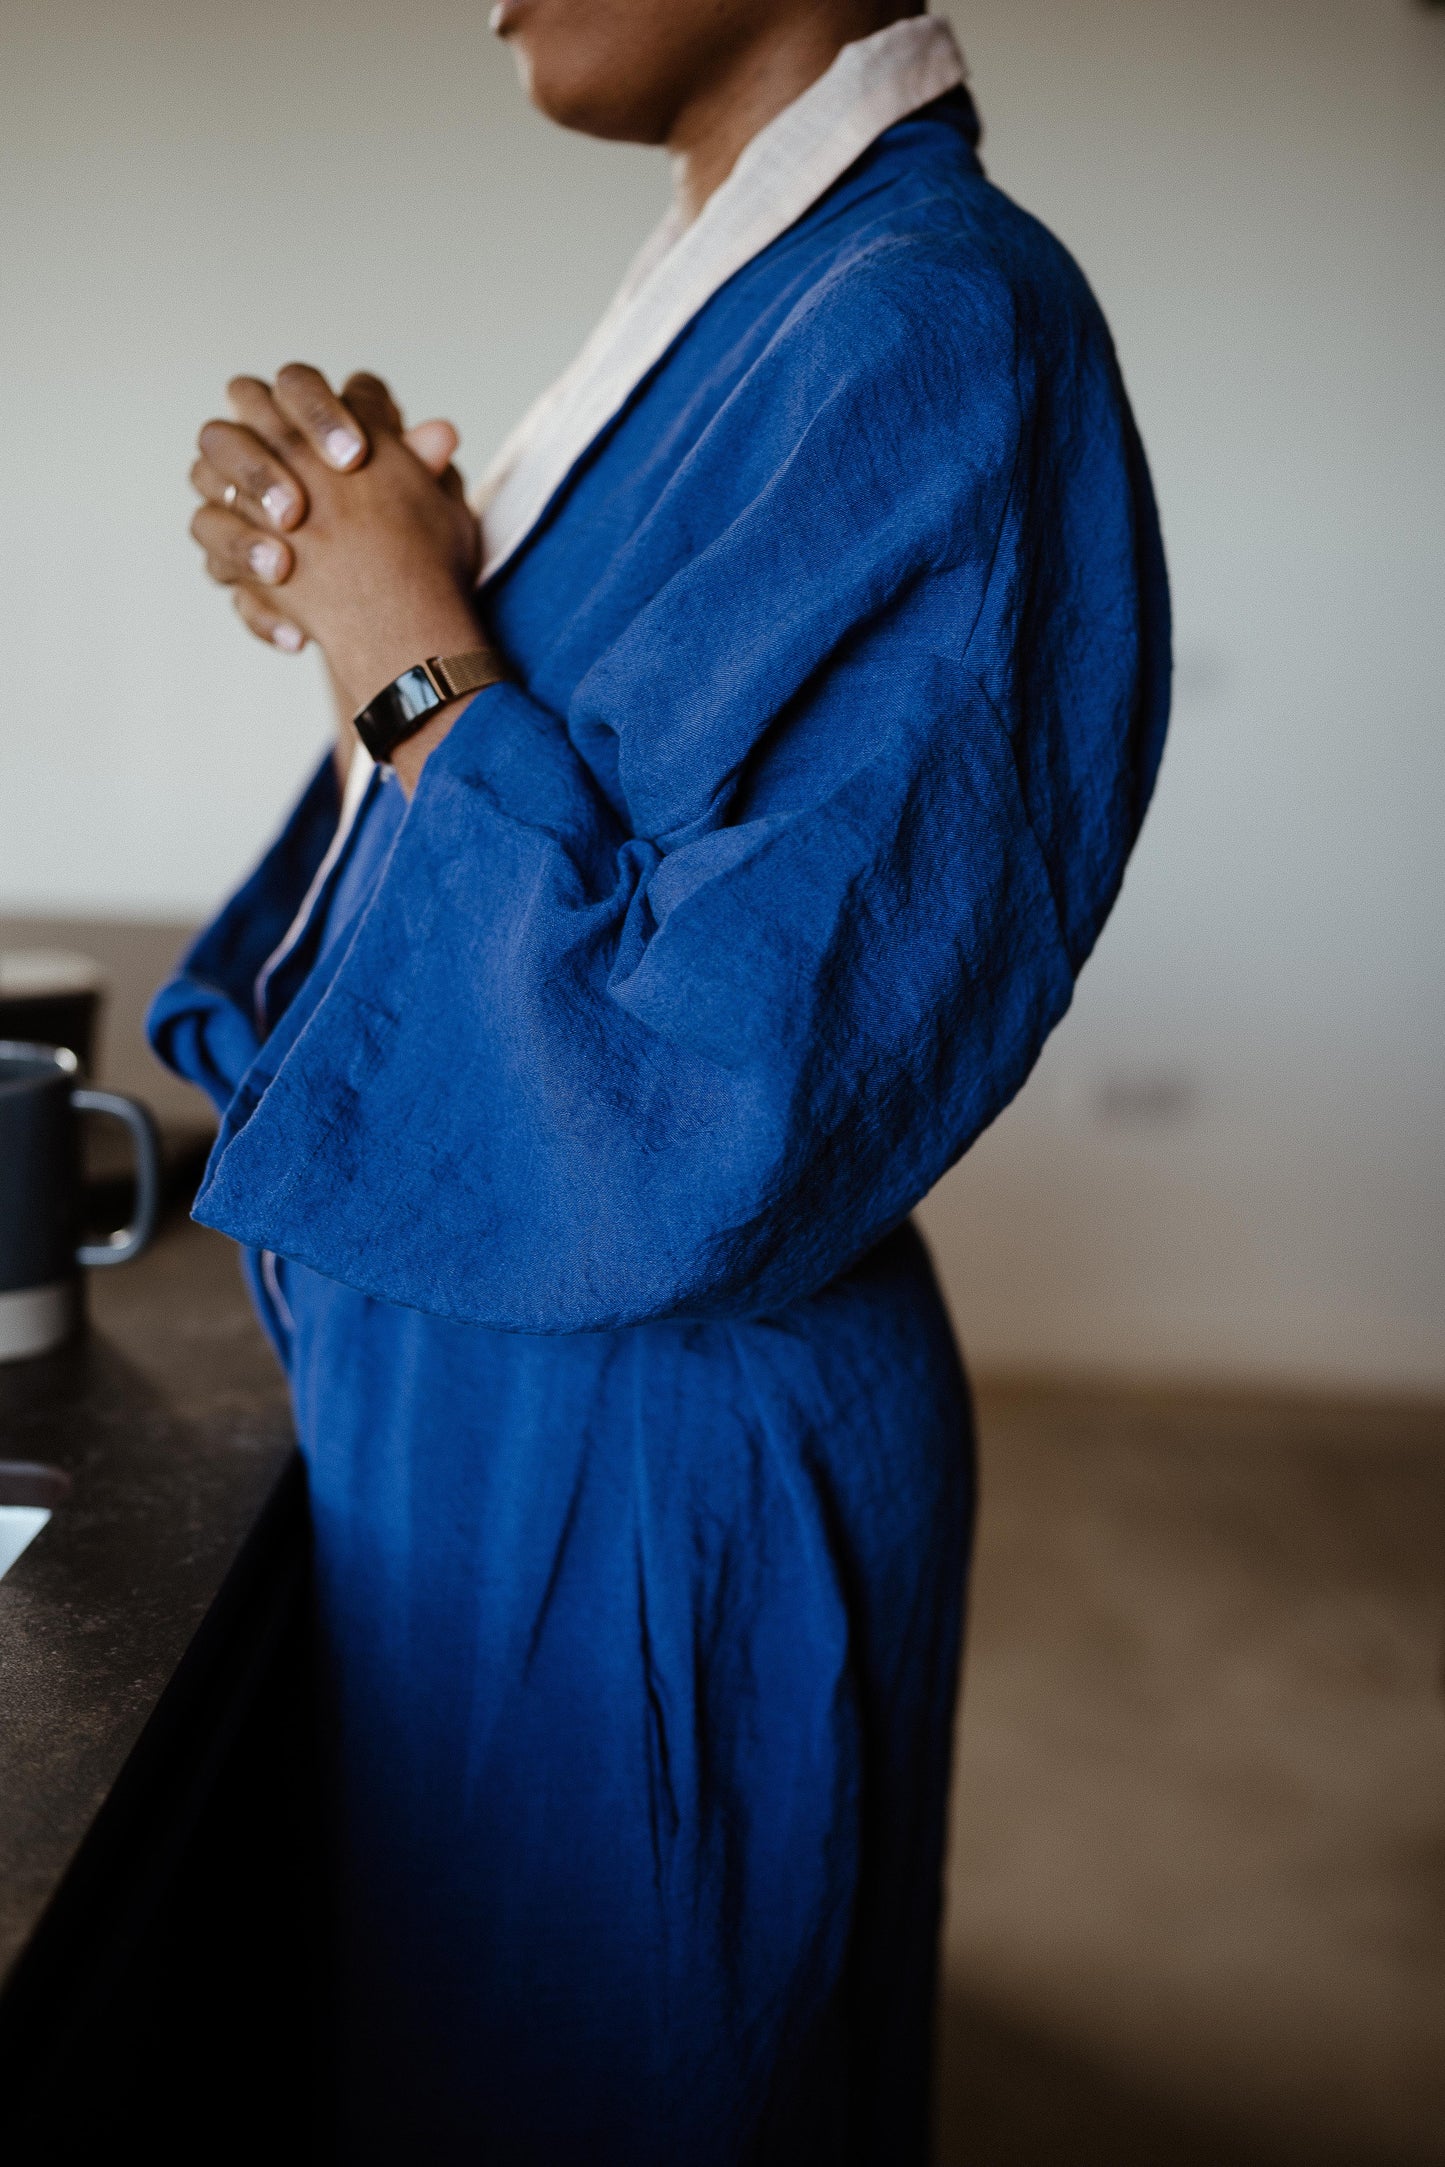 DANA ROBE | Your morning coffee will hit a little different wearing The Dana Robe. Created with our much loved striking blue linen, and contrasted with a soft pink naturally dyed lapels. Dana is a little the little bit of luxury your morning routine needs